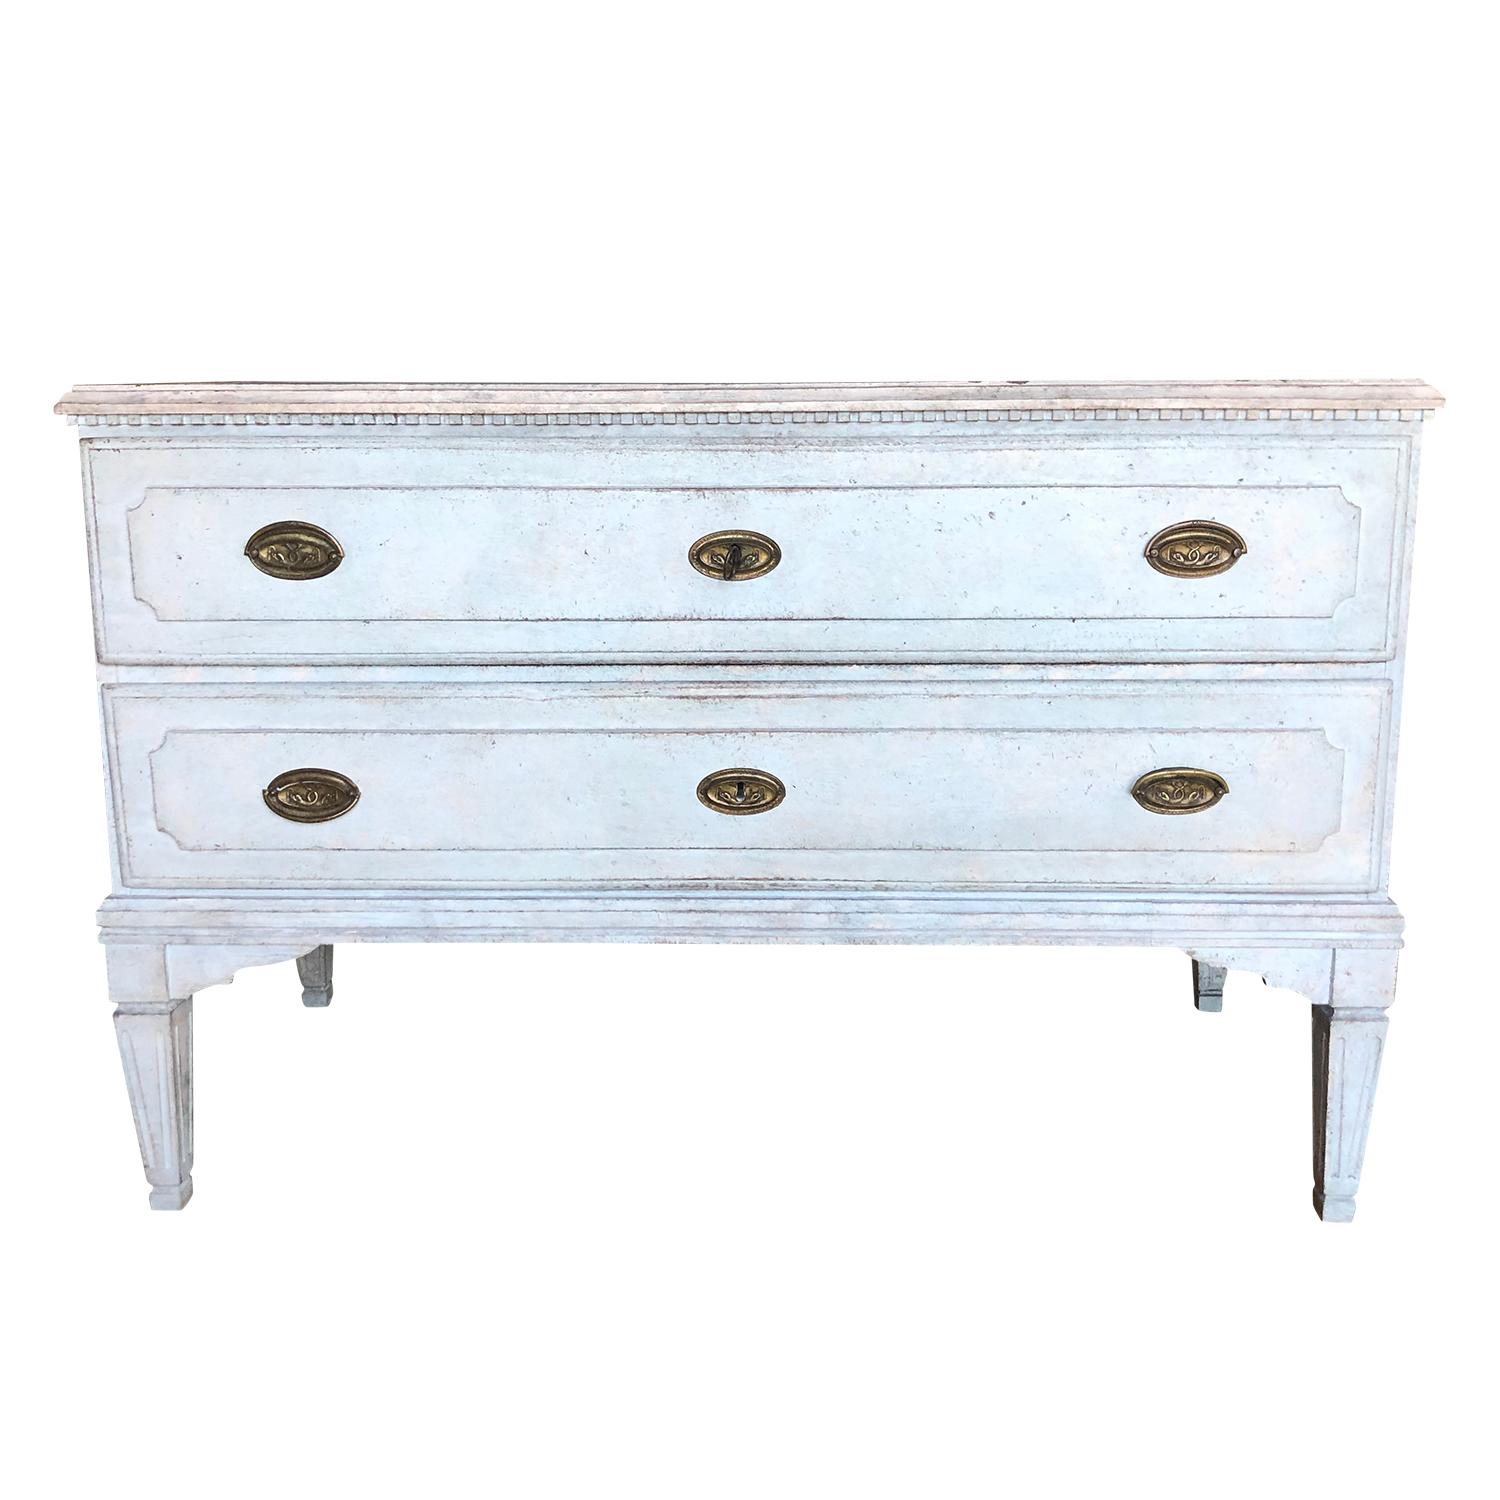 An antique pair of Swedish Gustavian chests with two drawers each, made of hand carved oakwood, supported by four straight tapered feet, in good condition. The light-blue, Scandinavian cabinets are detailed in the neoclassical Greek style with their